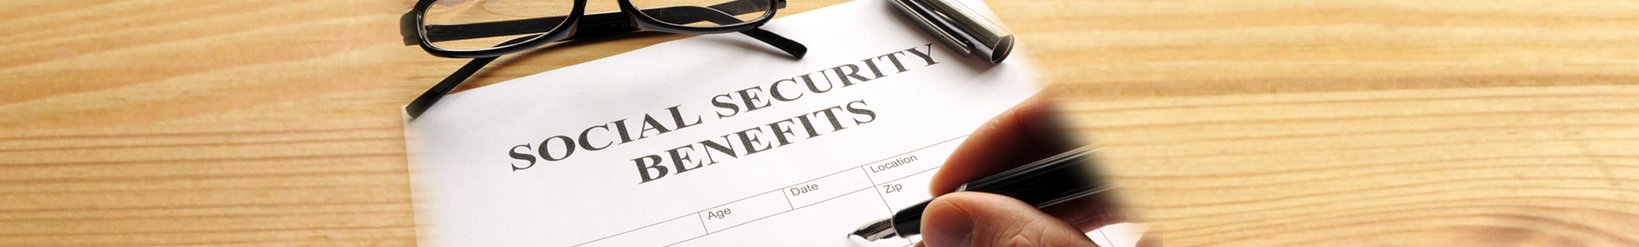 Social Security Disability Benefits for Soft Tissue Injuries / Burns (Page 1)